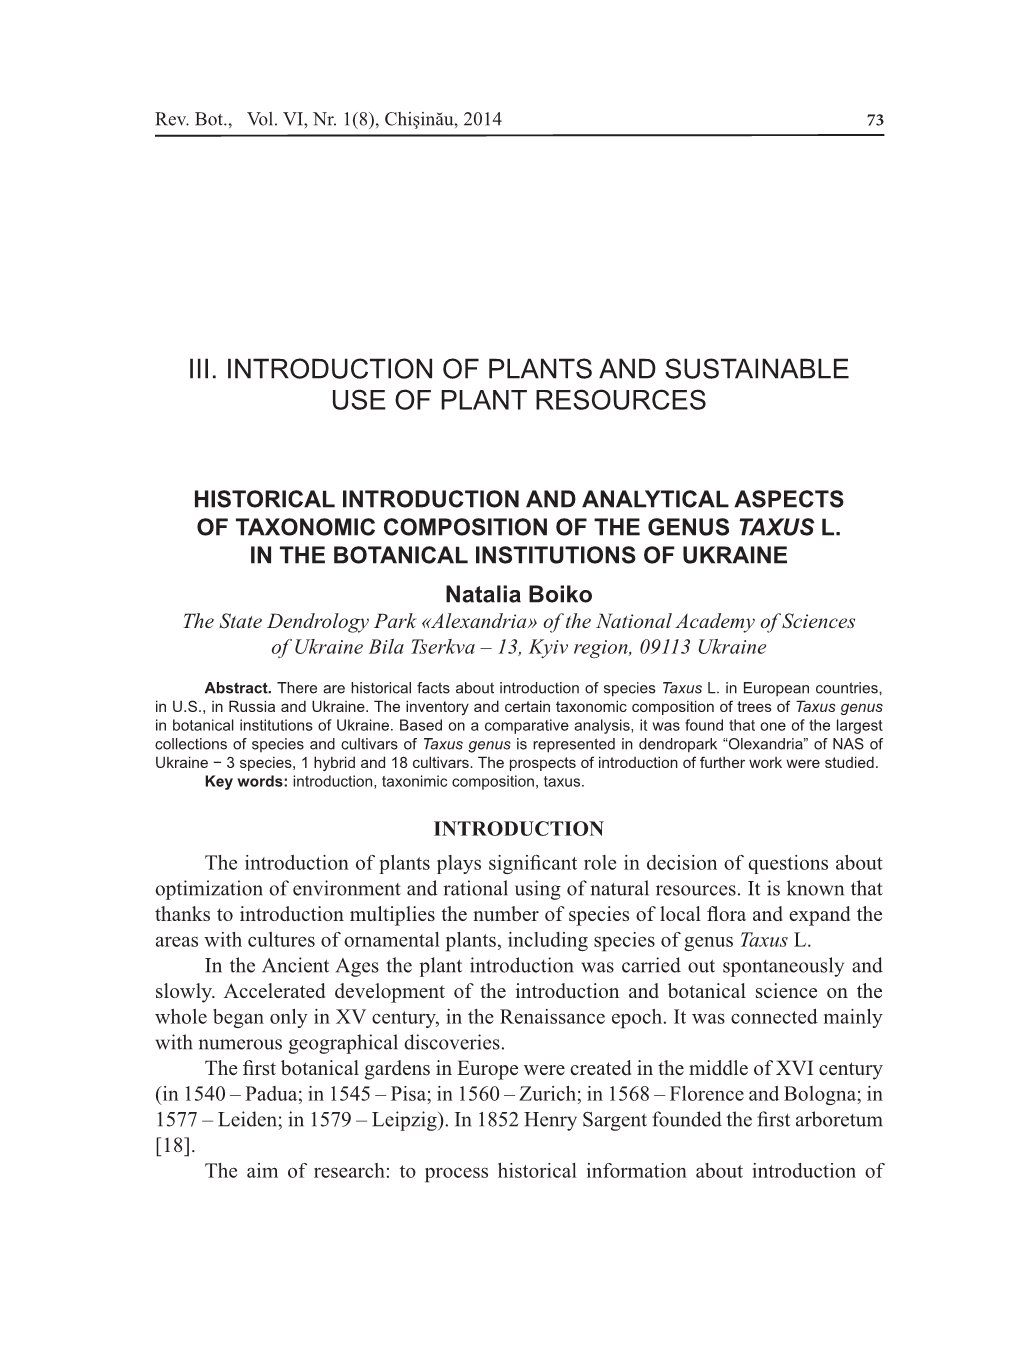 III. Introduction of Plants and Sustainable Use of Plant Resources